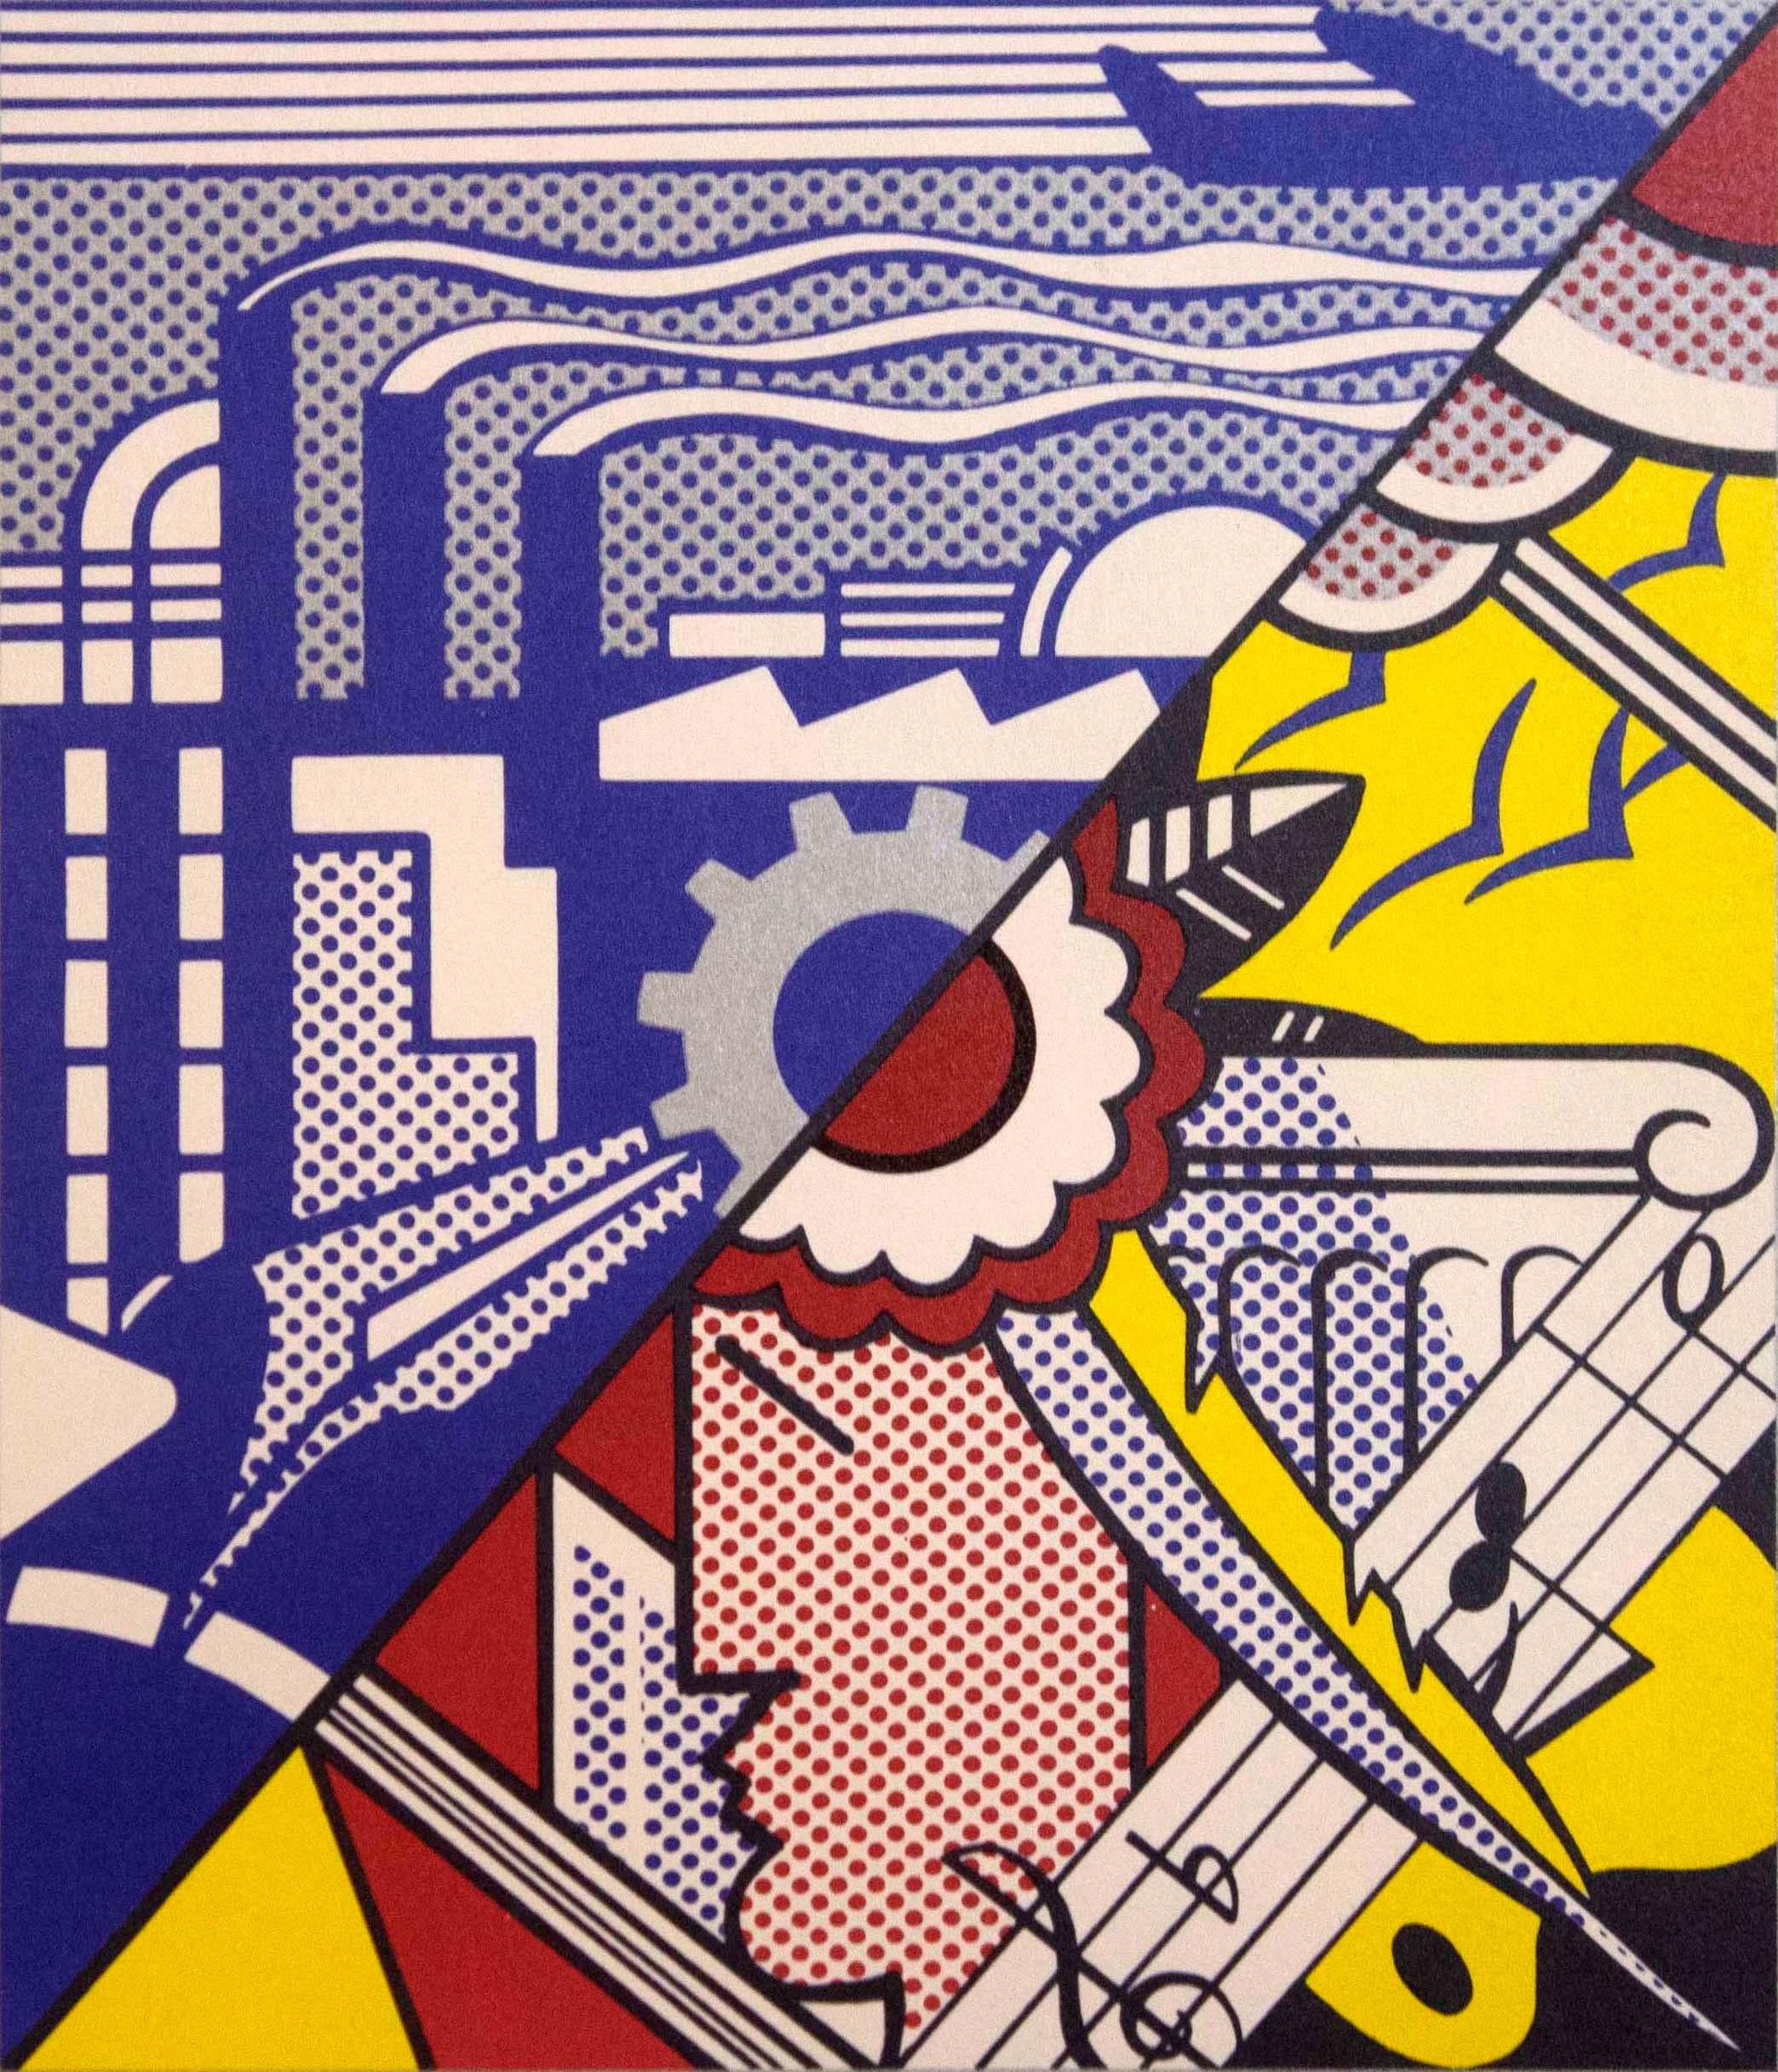 For your consideration is a spectacular book plate titled Industry and the Arts signed in pencil by pop artist Roy Lichtenstein. Dimensions: 20 H x 17.75 (framed). In excellent condition. 

Roy Lichtenstein (1923-1997) was an American pop artist.